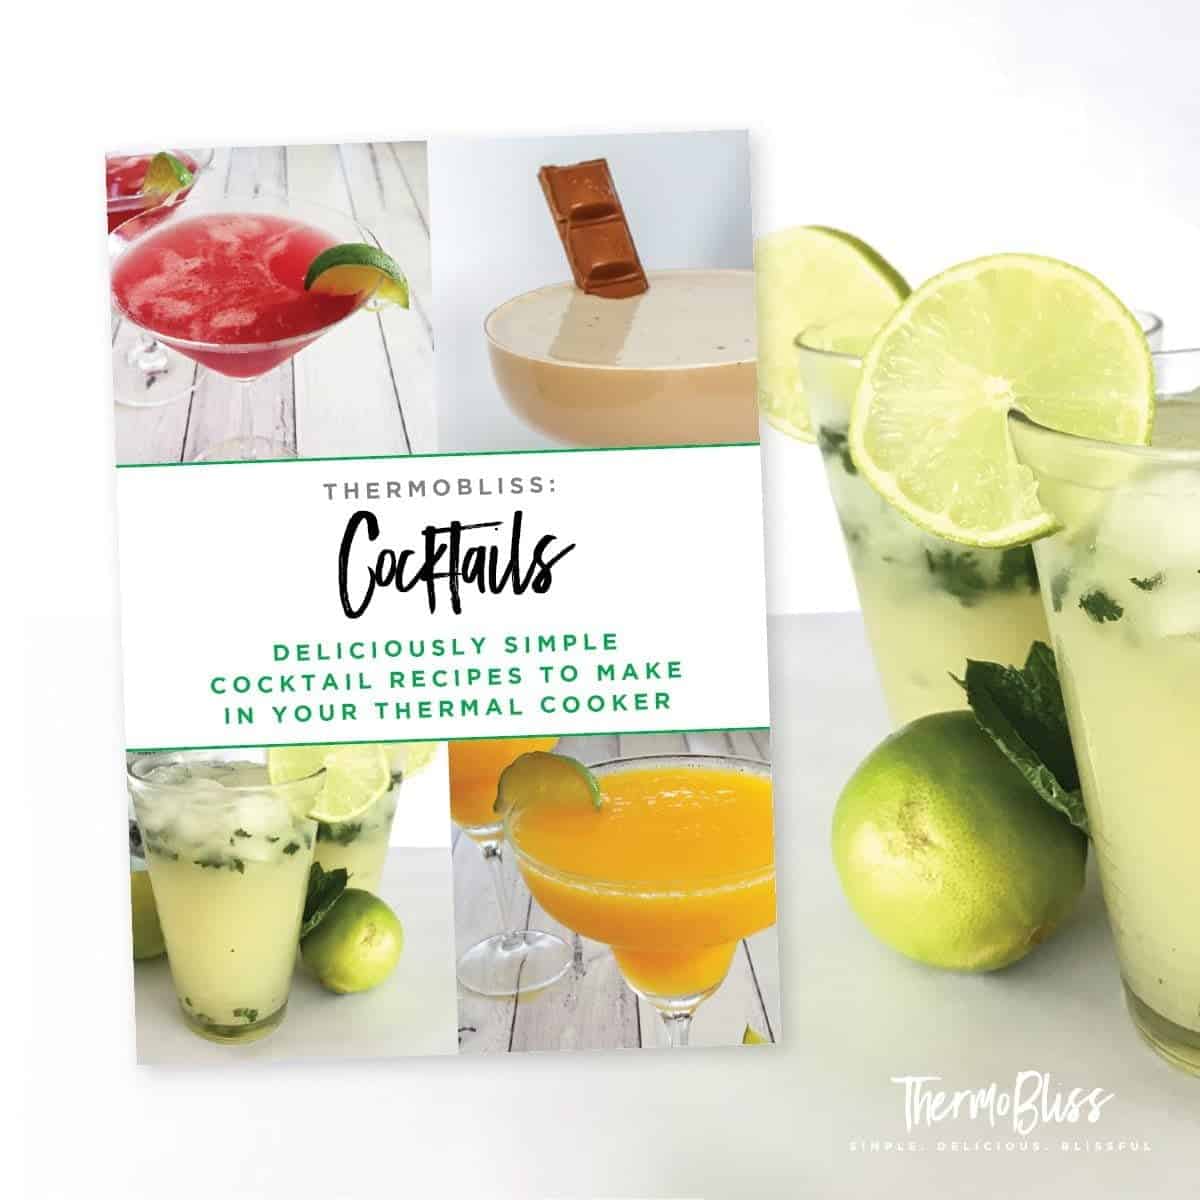 The cover of a recipe book - Thermobliss Cocktails